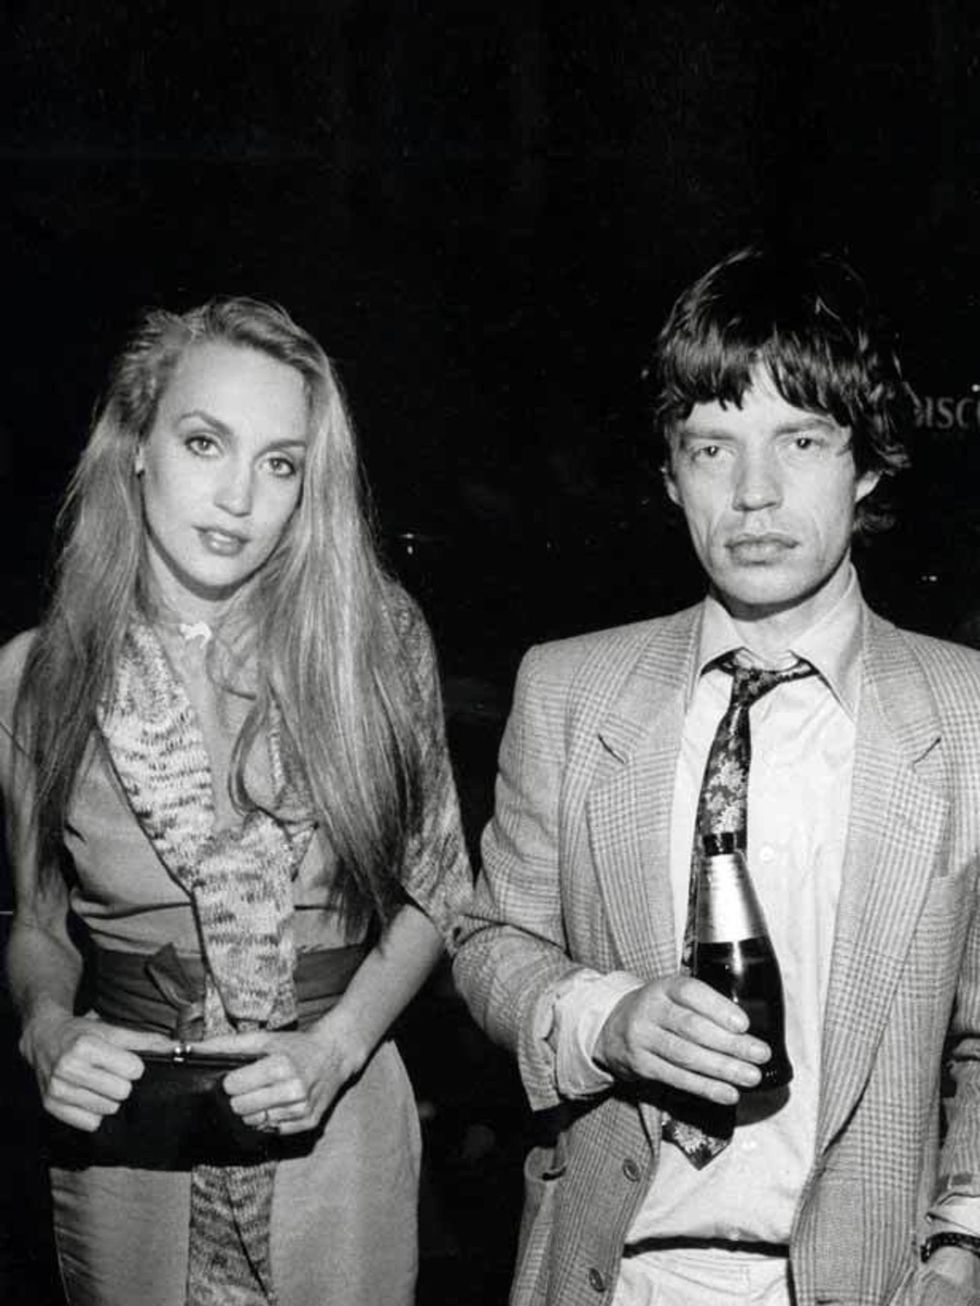 <p>Texas-born model Jerry Hall wed Mick Jagger in a Balinese ceremony in 1990, after years together. But in 1999, Jagger contested the validity of the union and received an annulment.</p>